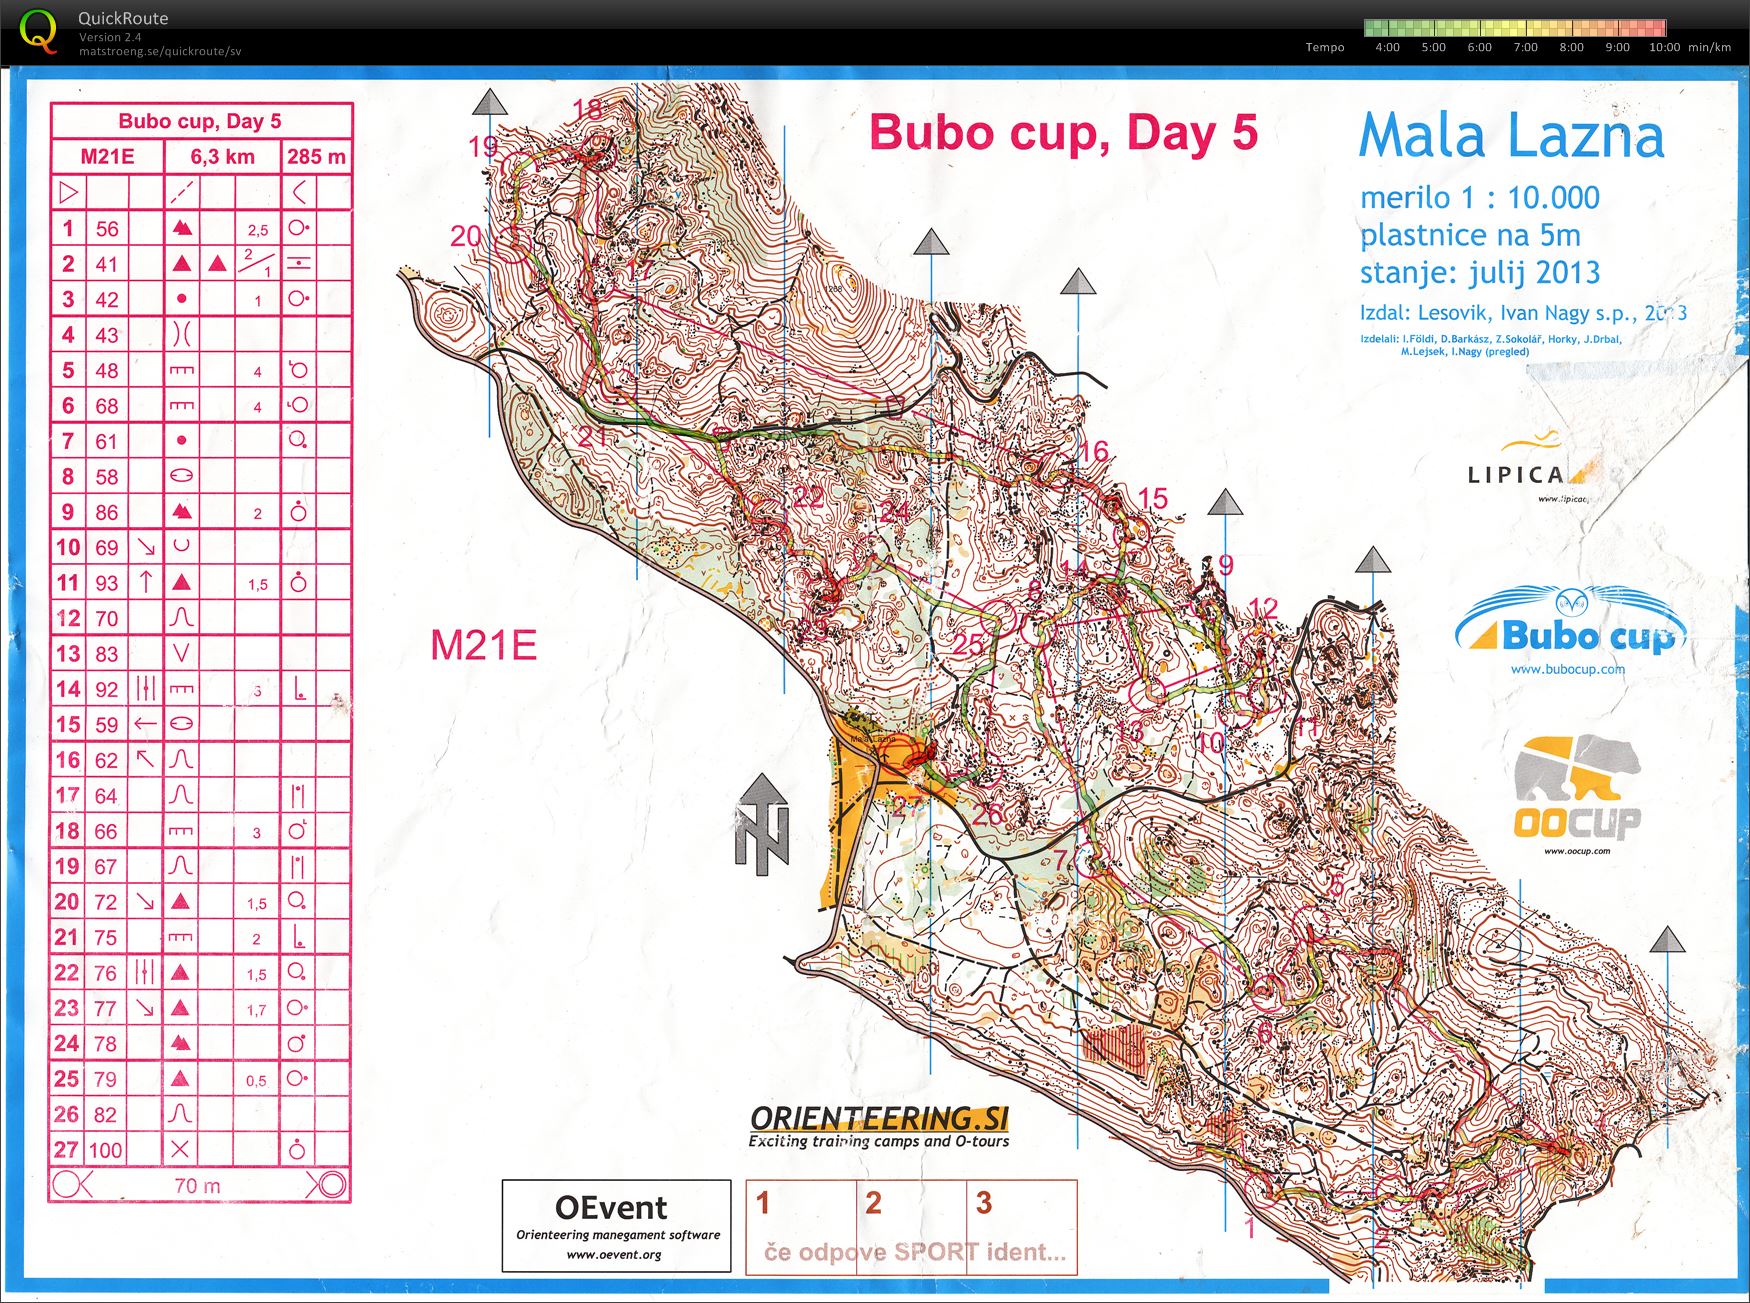 Bubo cup, Day 5 (23.07.2013)